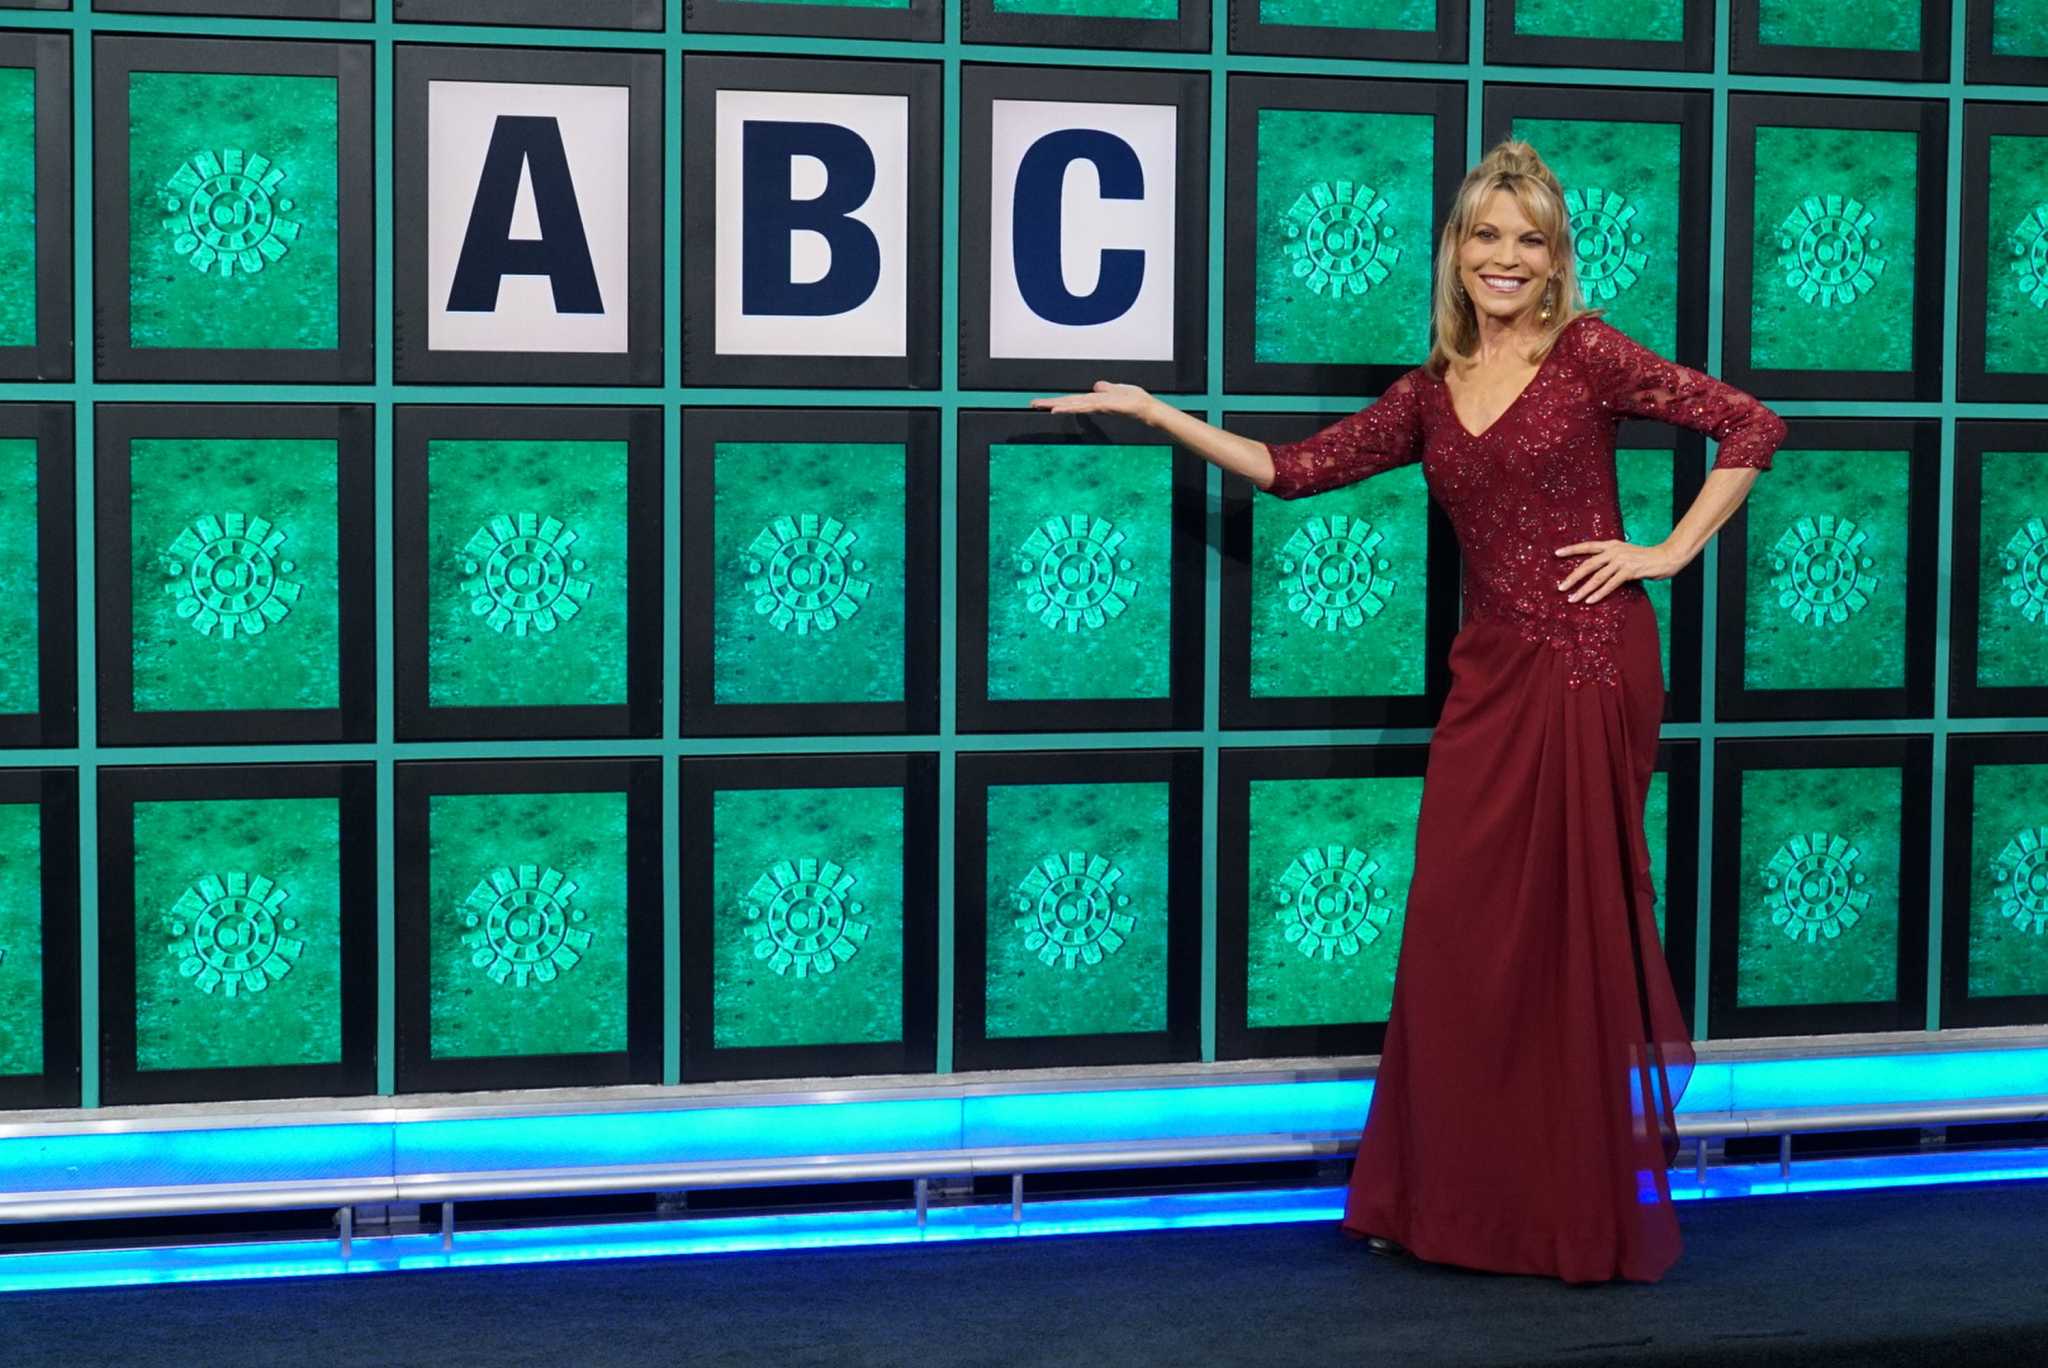 Vanna White made her debut as the letter-turning hostess on "Wheel of Fortune" in 1982. She replaced Susan Stafford in this role.